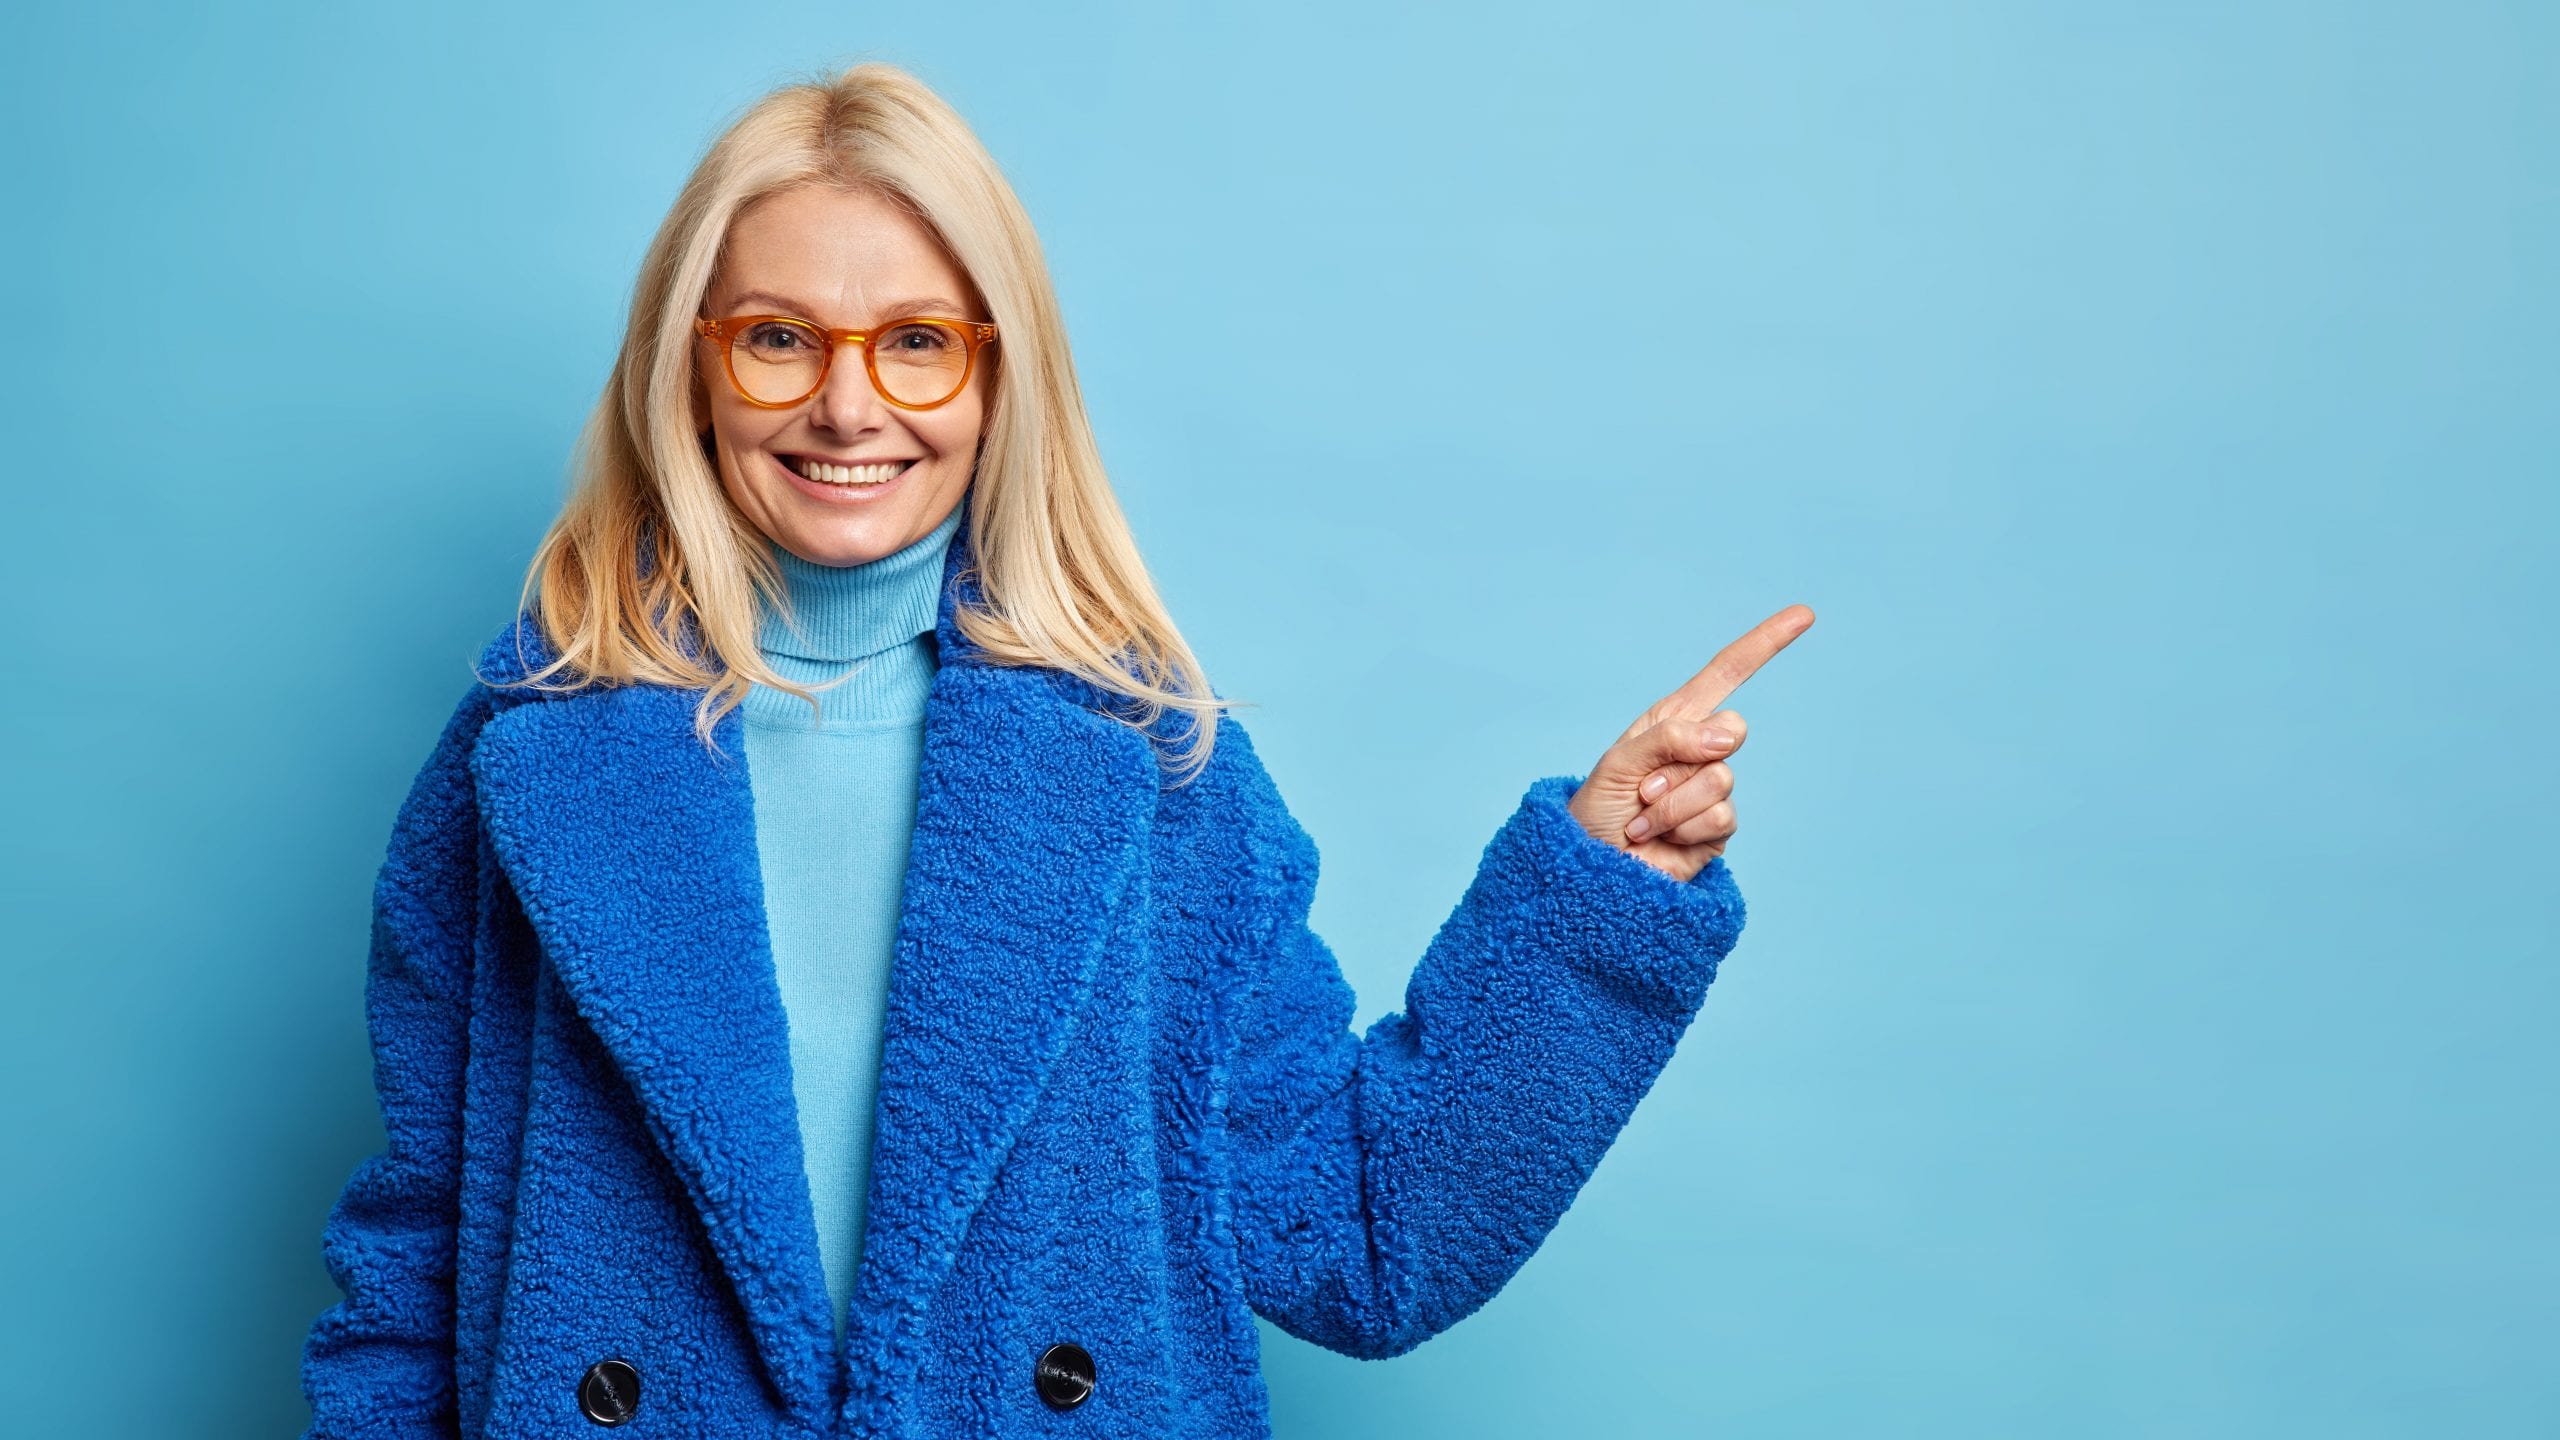 Beautiful middle aged woman with blonde hair wears spectacles and warm blue coat indicates away on copy space shows advertising content poses indoor. Winter fashion concept.